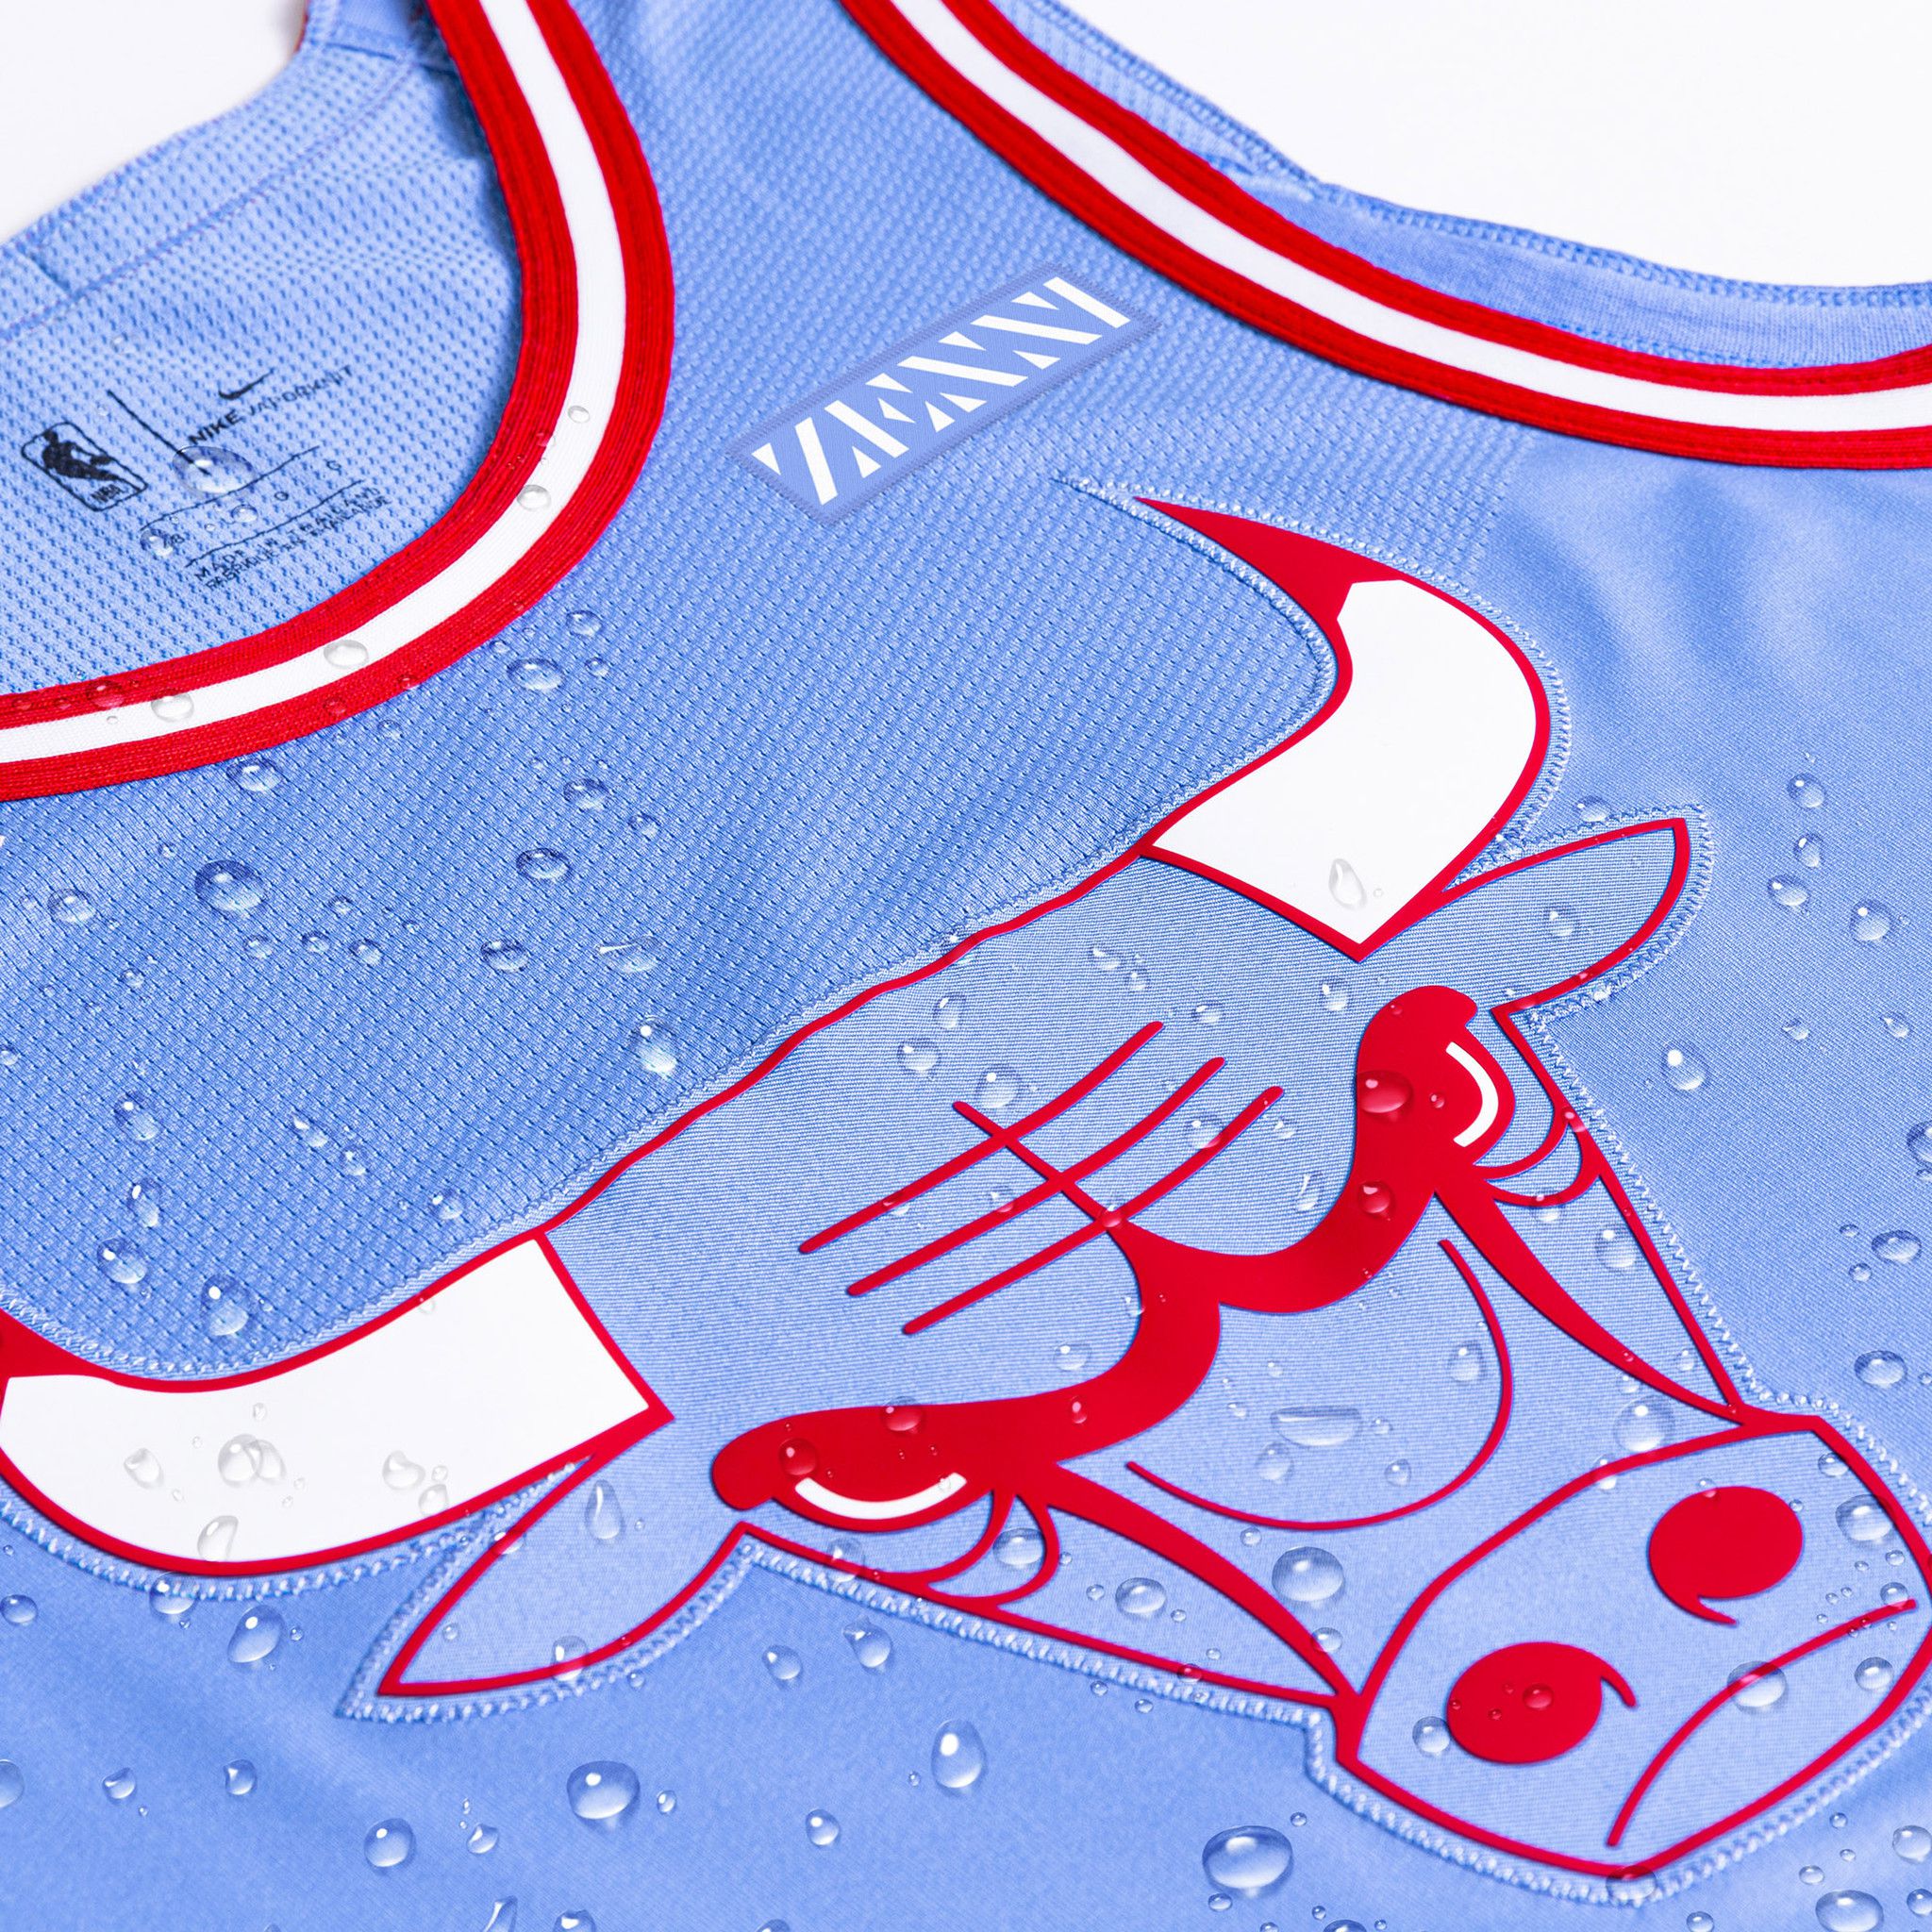 Which Bulls City Edition Uniform is Best? – The Lead